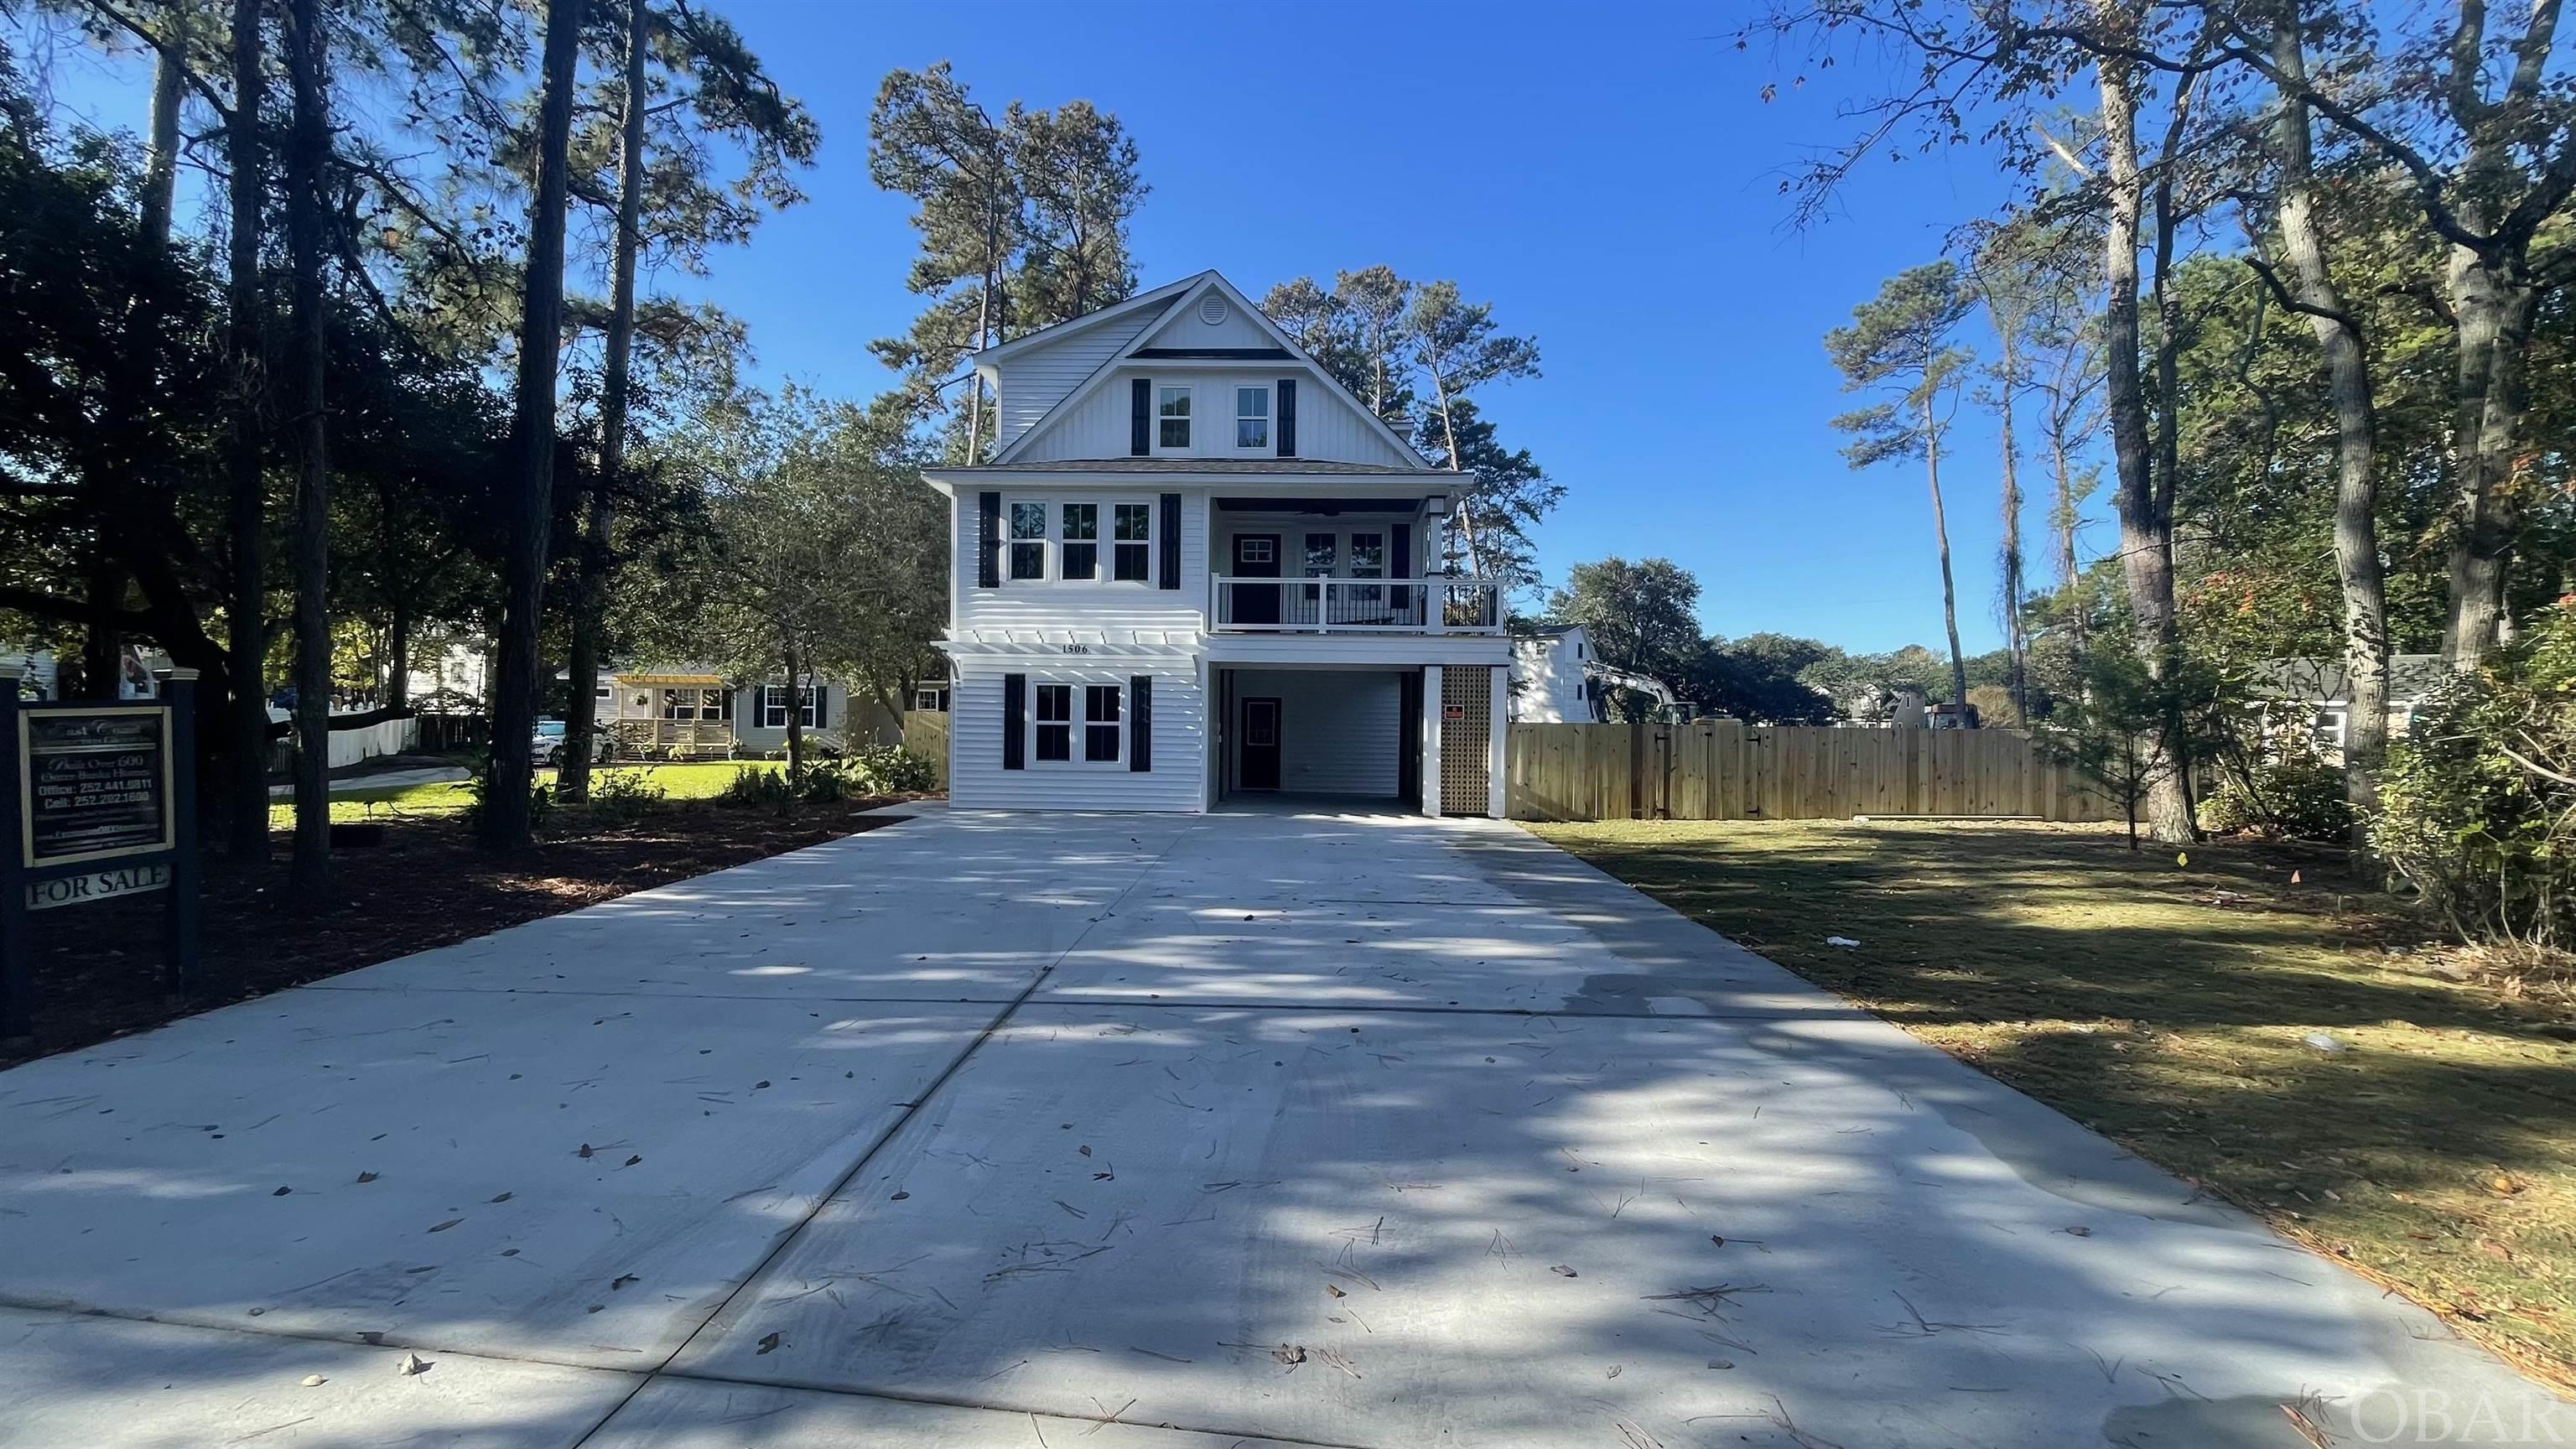 Complete by end of October. CUSTOM-BUILT 4 BR 3 and 1/2 bath NEW CONSTRUCTION in KILL DEVIL HILLS on RARE Lot approx. 15,000 sq ft (vs. 5000sq ft) COMPLETE WITH EXTENDED FAMILY SUITE/FLEX SPACE, KITCHENETTE, AND SEPARATE ENTRY on GROUND LEVEL! AND EXTRA BONUS ROOM TOP FLOOR! Ground-level-extended family/flex space features a kitchenette open living space with a farm sink, fridge, dishwasher, and microwave. The ground-level flex space also features a separate washer and dryer hookup behind the beautiful custom barn door. The ground-level ensuite has a large closet and built-in shelving. This home is perfect as a personal residence, second home, or investment, or live upstairs and rent the lower level to supplement your income! Tons of extras including privacy fence, sod, irrigation, and extended outdoor living space with built-in seating and TV hookup.  The entryway foyer, dining room, kitchen, great room, and hallways feature hardwood floors with hand-crafted trim. The open living space features a custom split face stone electric fireplace extending floor to ceiling, with customizable setting with changing colors! The kitchen features upgraded cabinets, quartz countertops, a farm sink, stainless steel appliances, and trendy lighting. The primary bedroom ensuite(mid-level) is accentuated with a tray ceiling and the bath has a quartz countertop, a custom marble shower, and a marble floor. The walk-in closet is ready for you with built-in wooden shelves. The laundry and half bath are hidden behind a barn-style door.  As you take the stairs to the upper level, notice the custom-crafted handrails and attention to detail. Each bedroom features upgraded polypropylene carpet. There are two bedrooms on the upper level with a shared bath. In addition, the top floor features a large bonus room. Imagine the possibilities such as an office, playroom or theater room!  The covered outdoor entertainment area features a custom bar, ceiling, and TV hook-up, expanding the home's living space. The outdoor area is large enough to include room for a future pool and pool house. (preliminary survey on file). As one of the most respected builders in the Outer Banks, Bill and Kim Lane have built over 700 homes, including luxury ocean speculative homes on the Outer Banks, putting the same care and quality into construction as they do the finishing details. The windows are all high-impact resistant, and the exterior walls are 2"x6" allowing for more strength and insulation. The home is a comfort-assured home with Lennox 3-zone 14 and 16 SEER system saving you money for years to come. This home is in a great location situated on a large lot with room for a pool, pool house, and extended outdoor living! Located in First Flight Village close to Multi Use Path, and nearby beach access on First Street. Enjoy being in the heart of KDH close to Publix,  theater, restaurants, Lowe's and the Wright Brother's Monument! X Flood Zone! Plans copyrighted. All pictures are similar to the new construction.